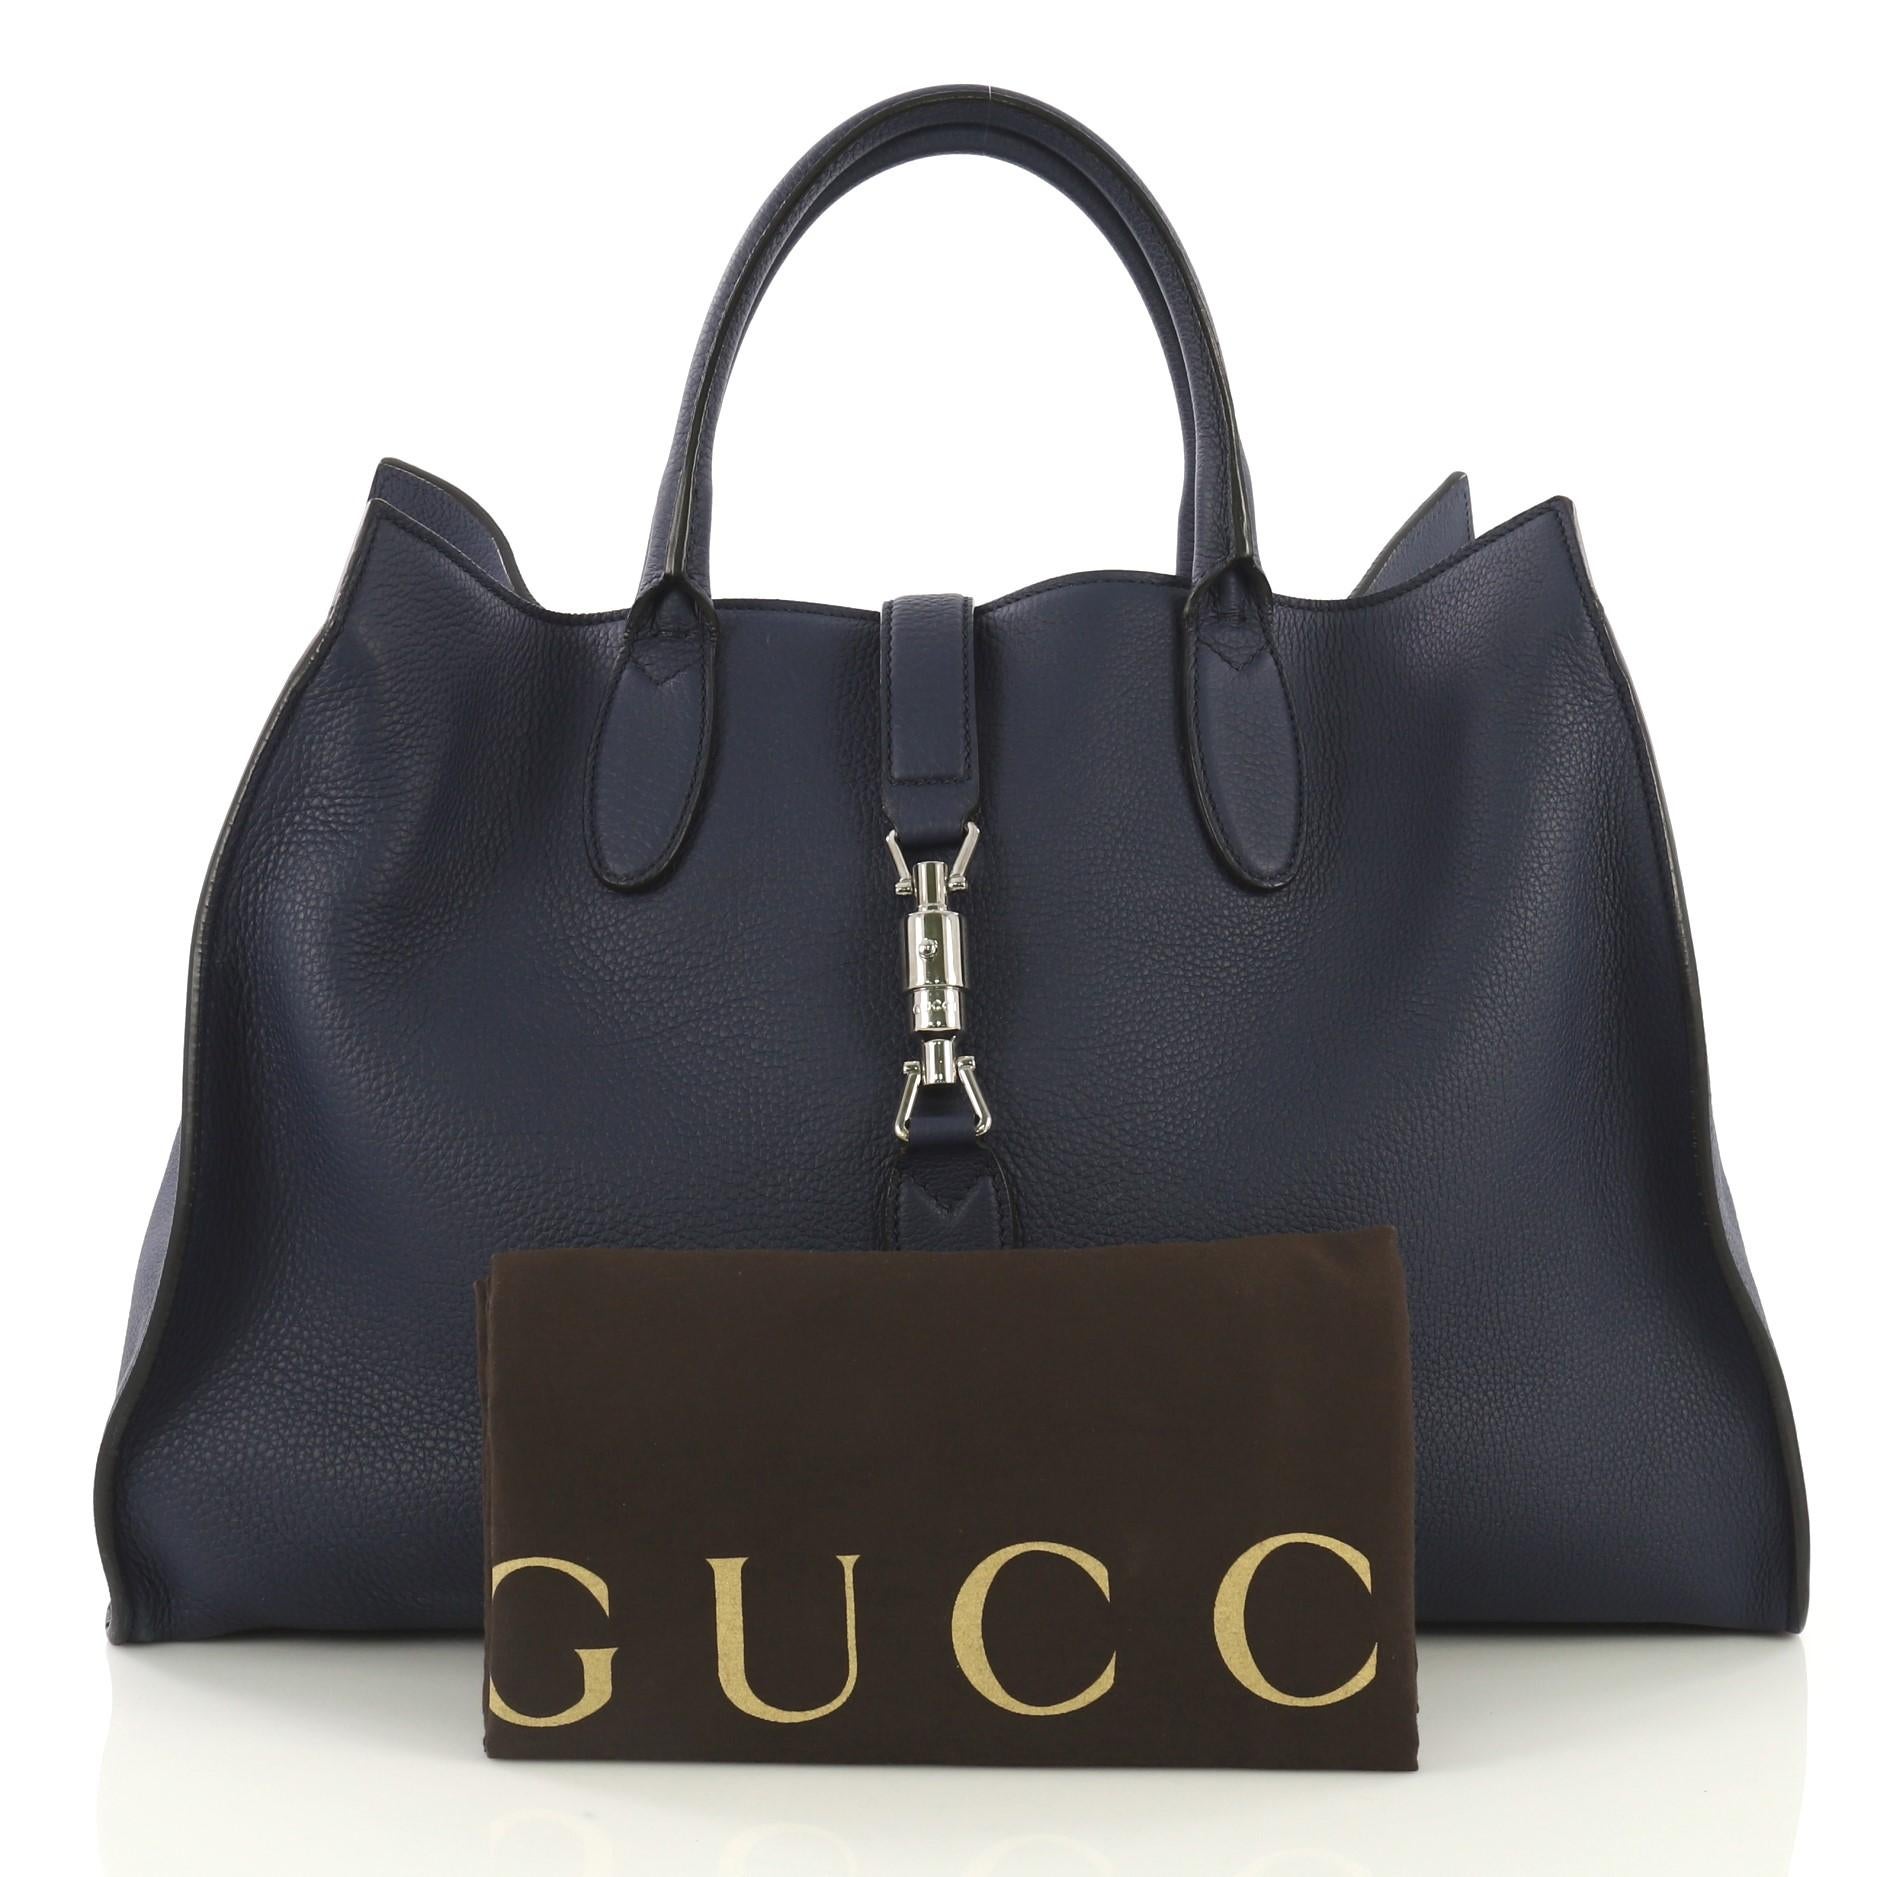 This Gucci Jackie Soft Tote Leather Large, crafted from blue leather, features dual rolled handles and silver-tone hardware. Its piston-lock closure opens to a blue suede interior with side zip pockets. 

Estimated Retail Price: $2,990
Condition: